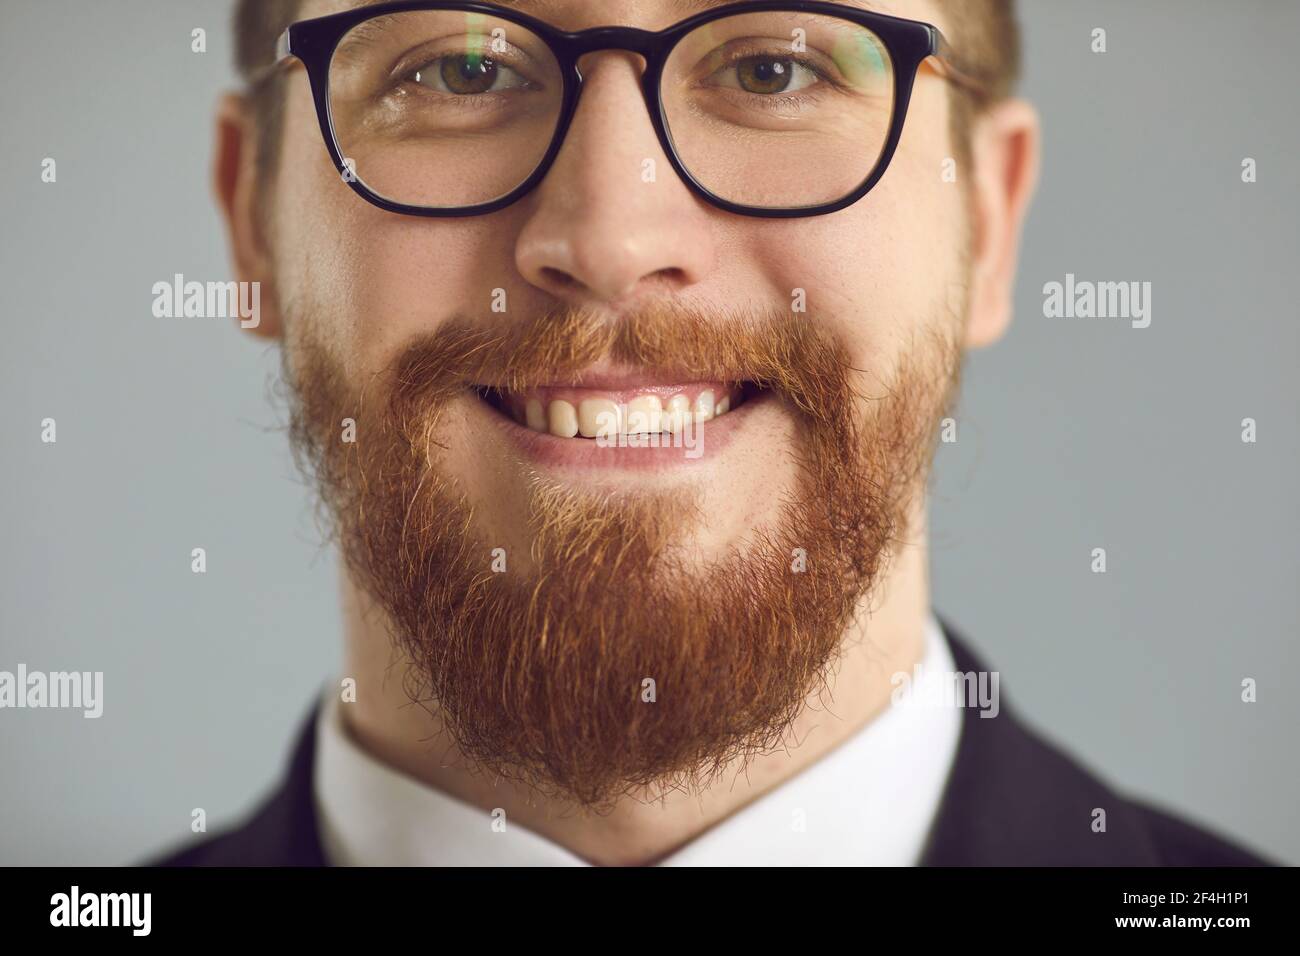 Closeup studio shot of happy smiling man in glasses with ginger beard and mustache Stock Photo